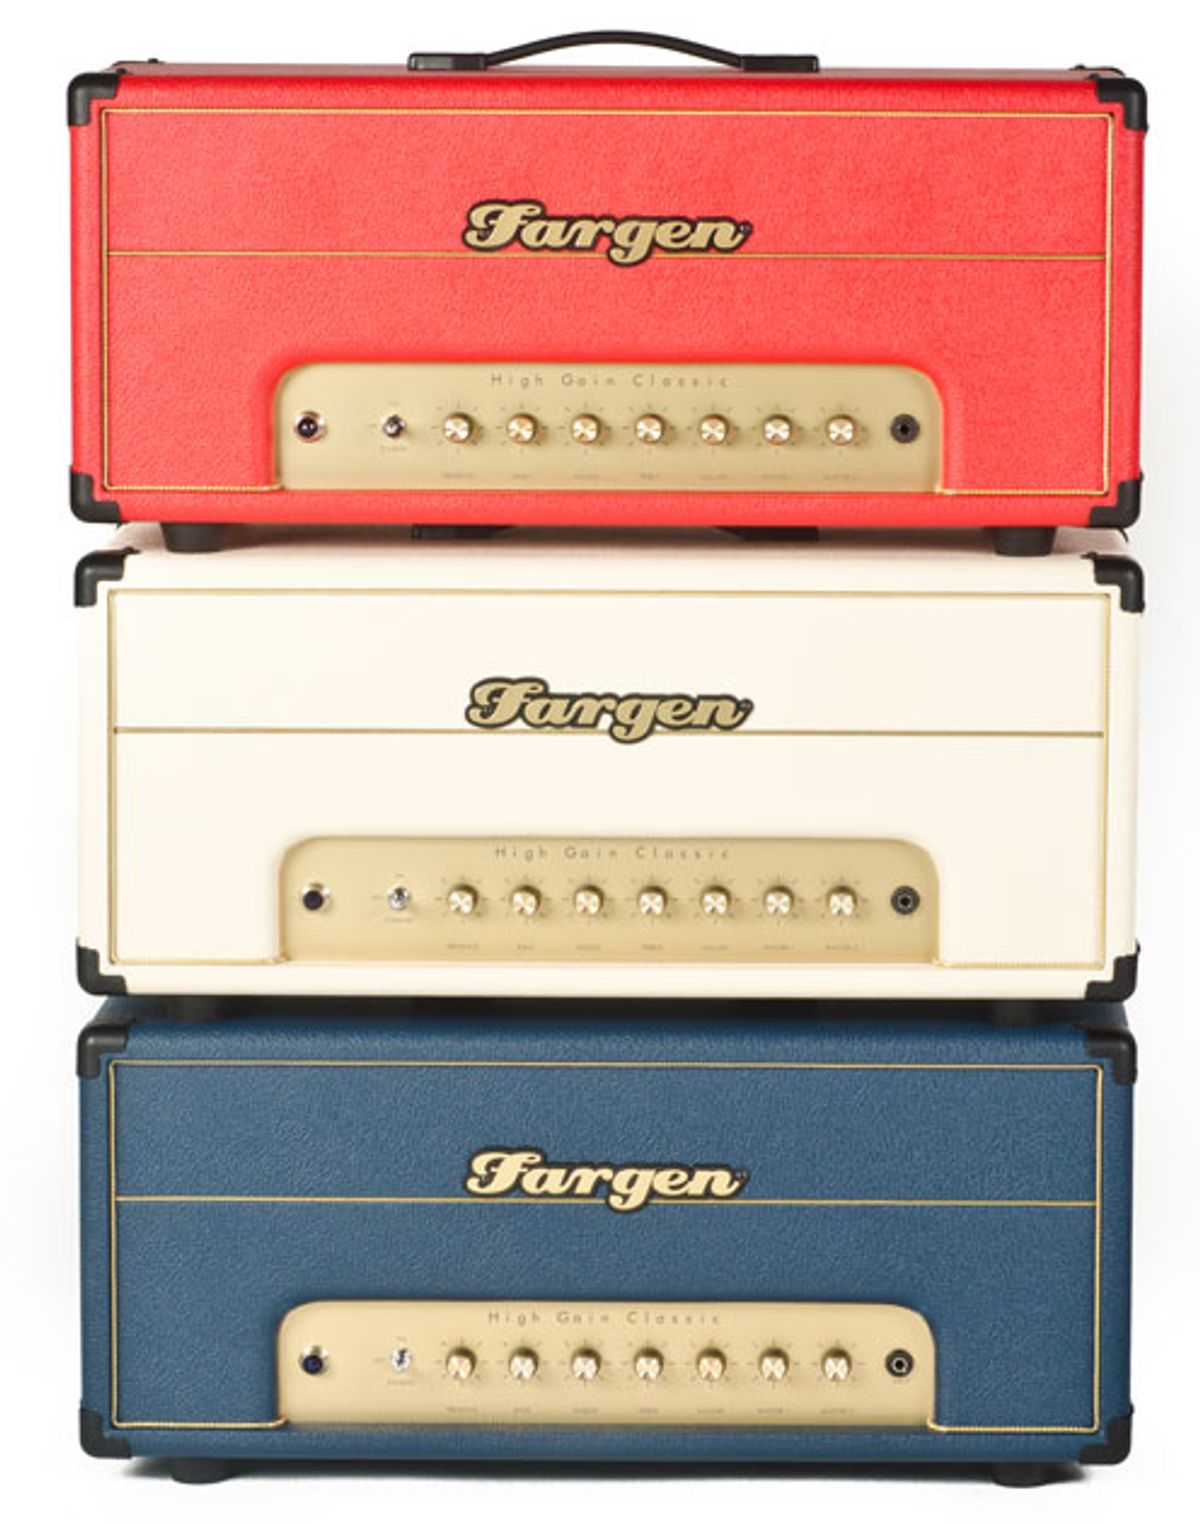 Fargen Amps Launches New 2014 Product Line